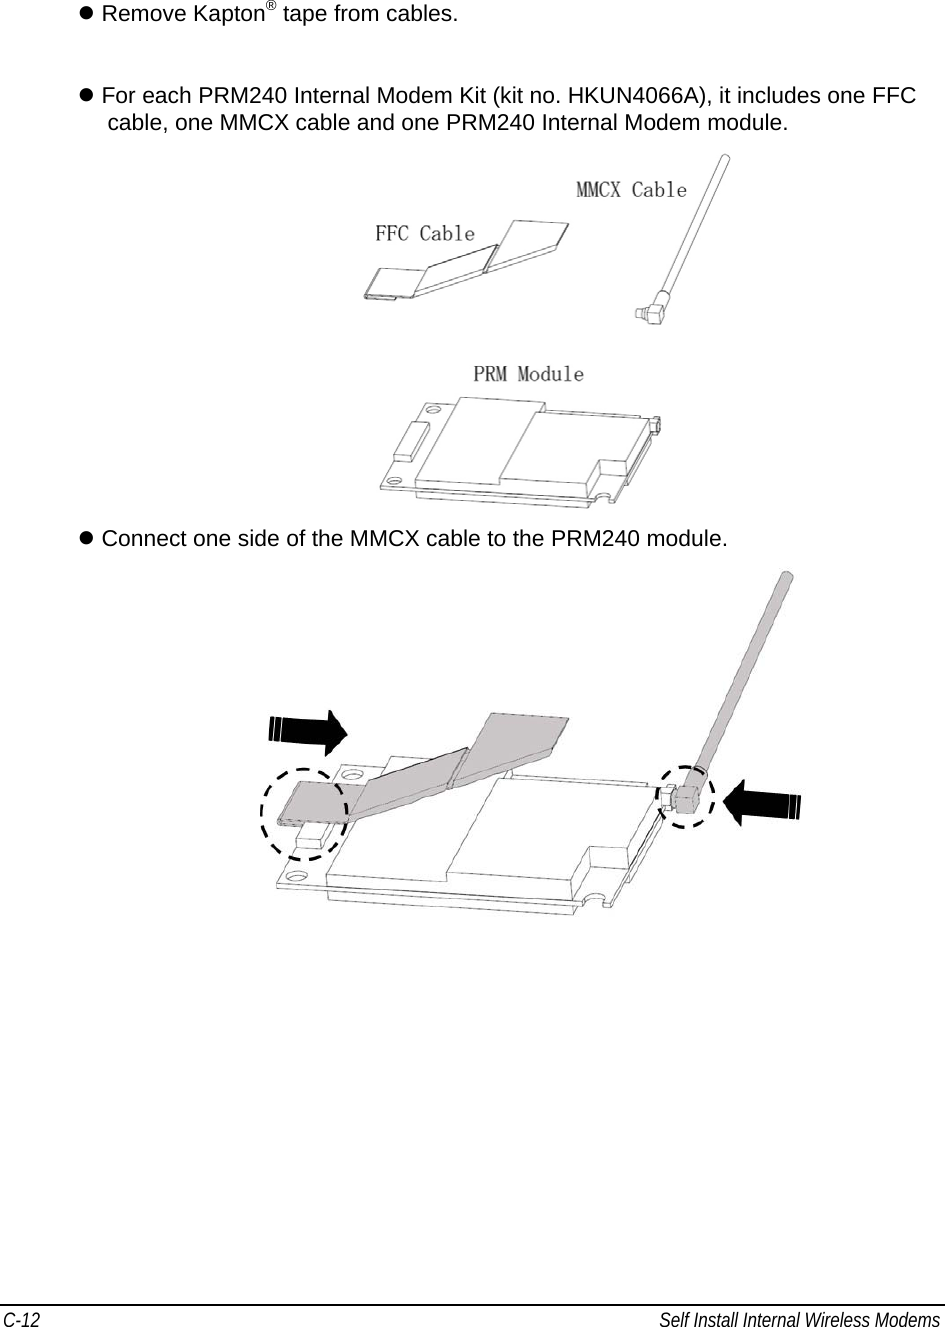 C-12  Self Install Internal Wireless Modems                                            z Remove Kapton® tape from cables.  z For each PRM240 Internal Modem Kit (kit no. HKUN4066A), it includes one FFC cable, one MMCX cable and one PRM240 Internal Modem module.  z Connect one side of the MMCX cable to the PRM240 module.  